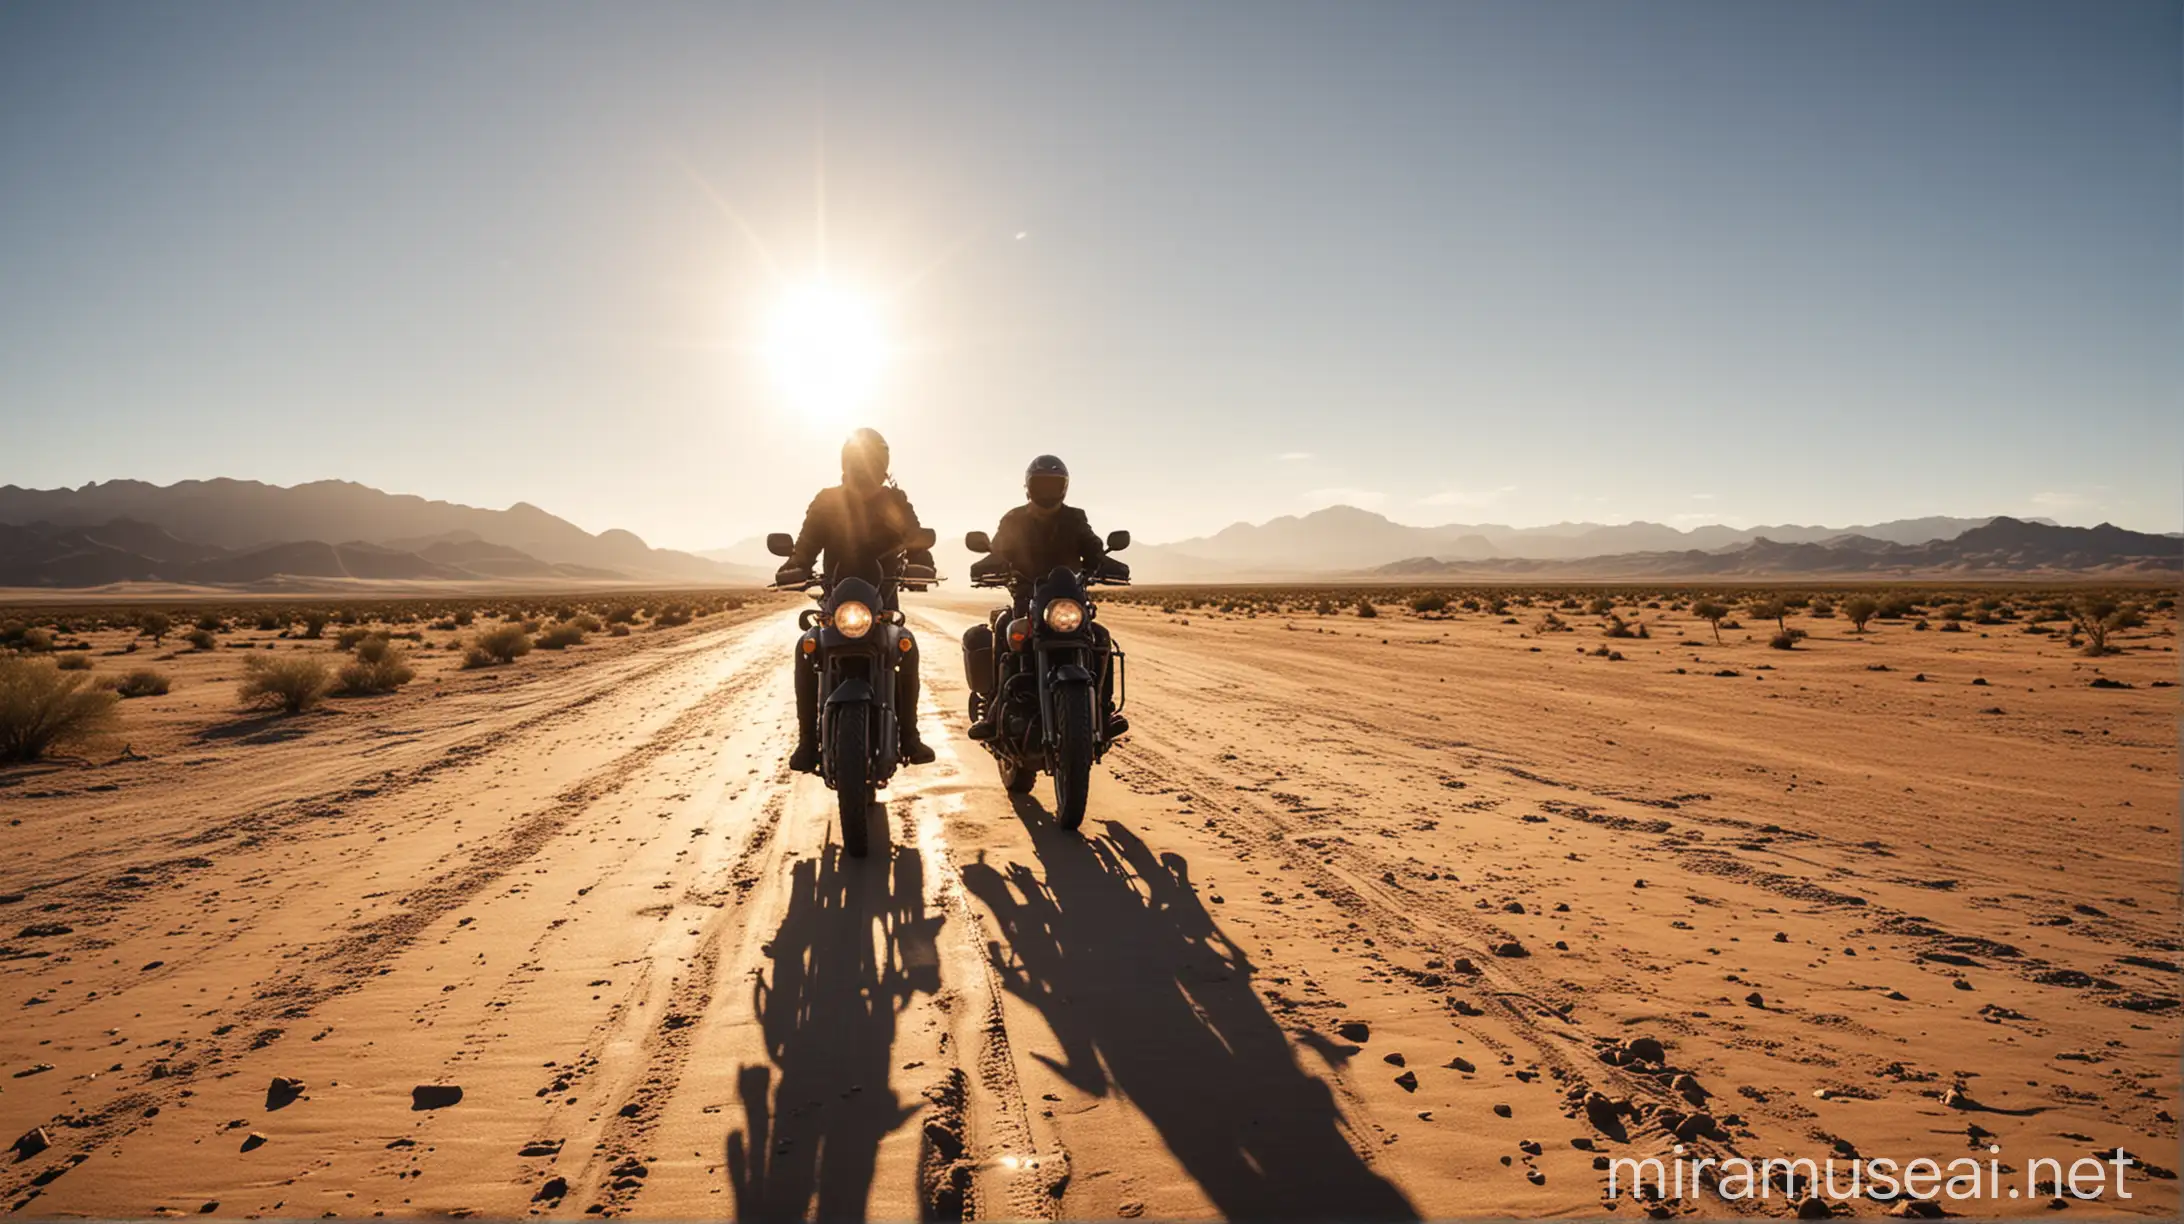 Make an image of a motorcycle traveler in the middle of a desert during a sunny day taking a water break.